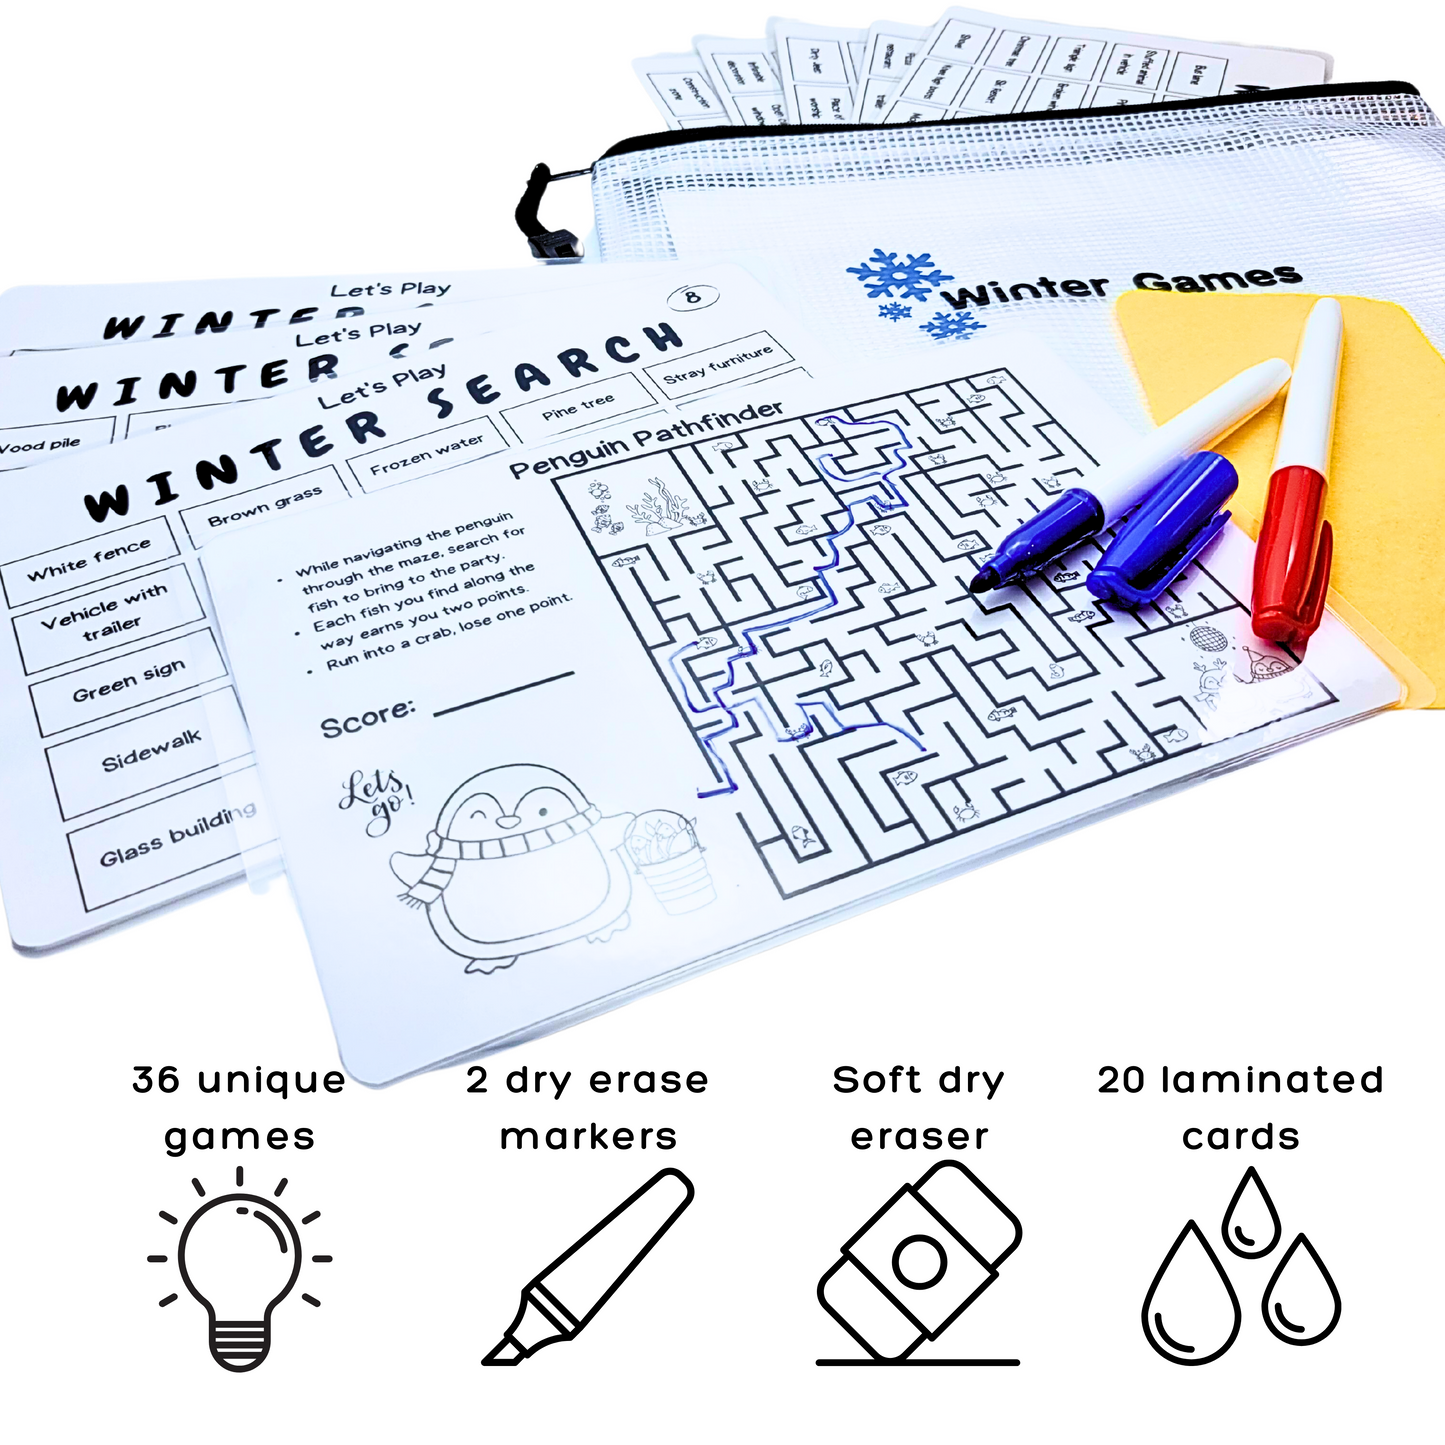 Winter Travel Games For Families: 36 Unique Games, Reusable Laminated Cards, Scavenger Hunt, Multiplayer Games for Kids, Car and Airplane Approved